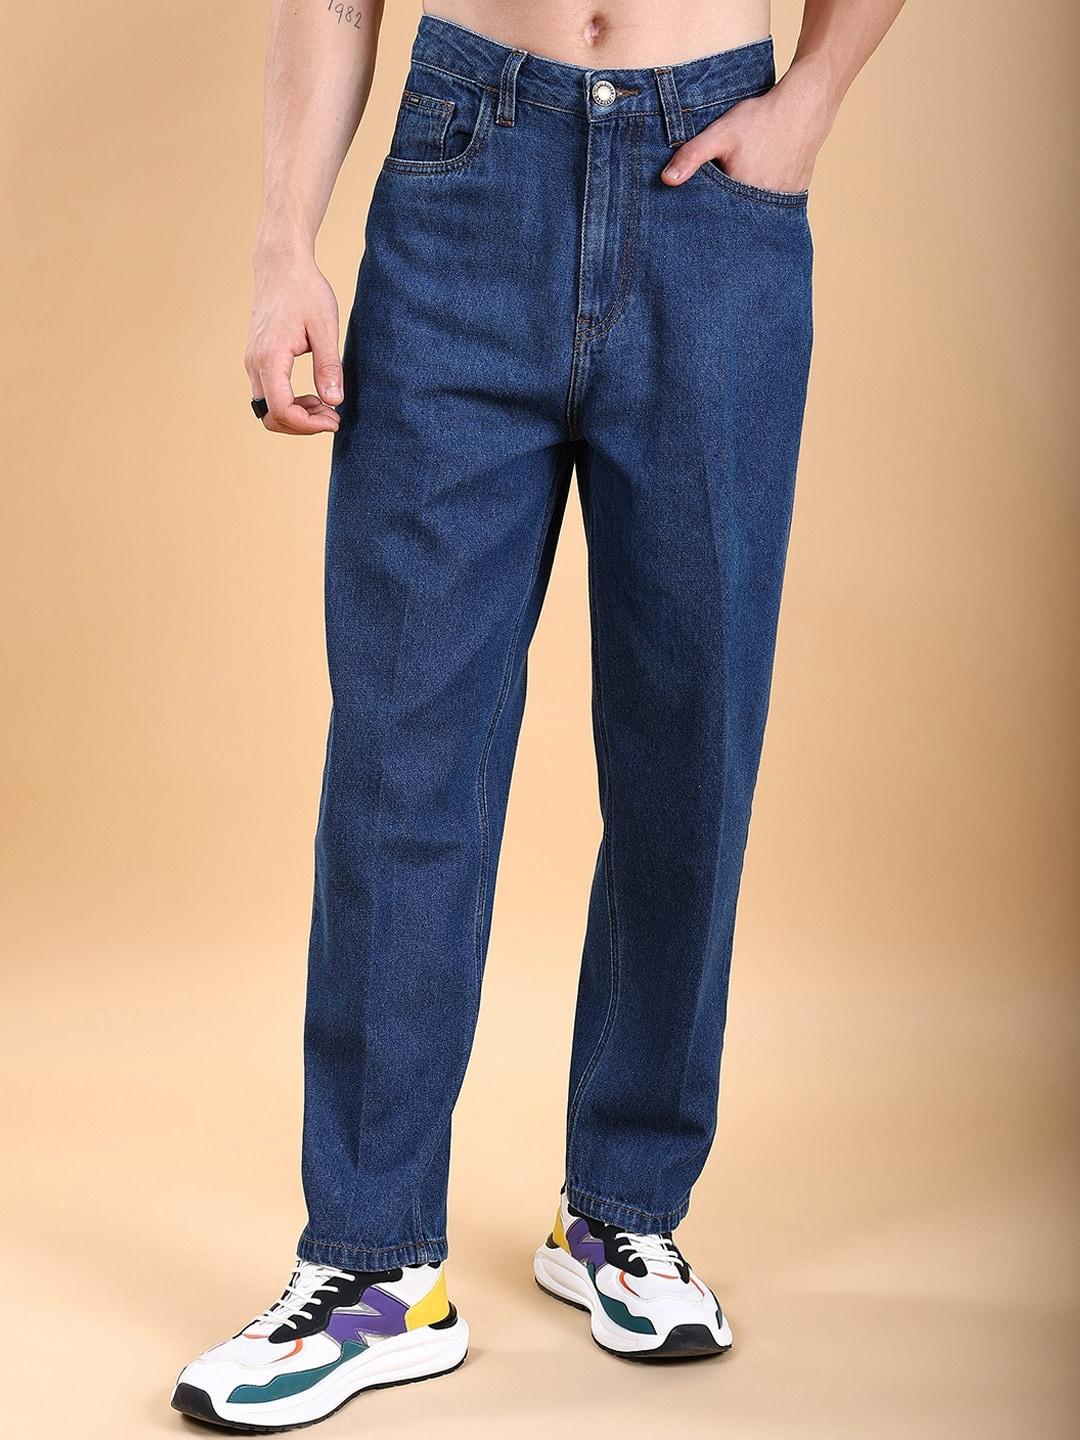 highlander-men-mid-rise-relaxed-fit-cotton-jeans